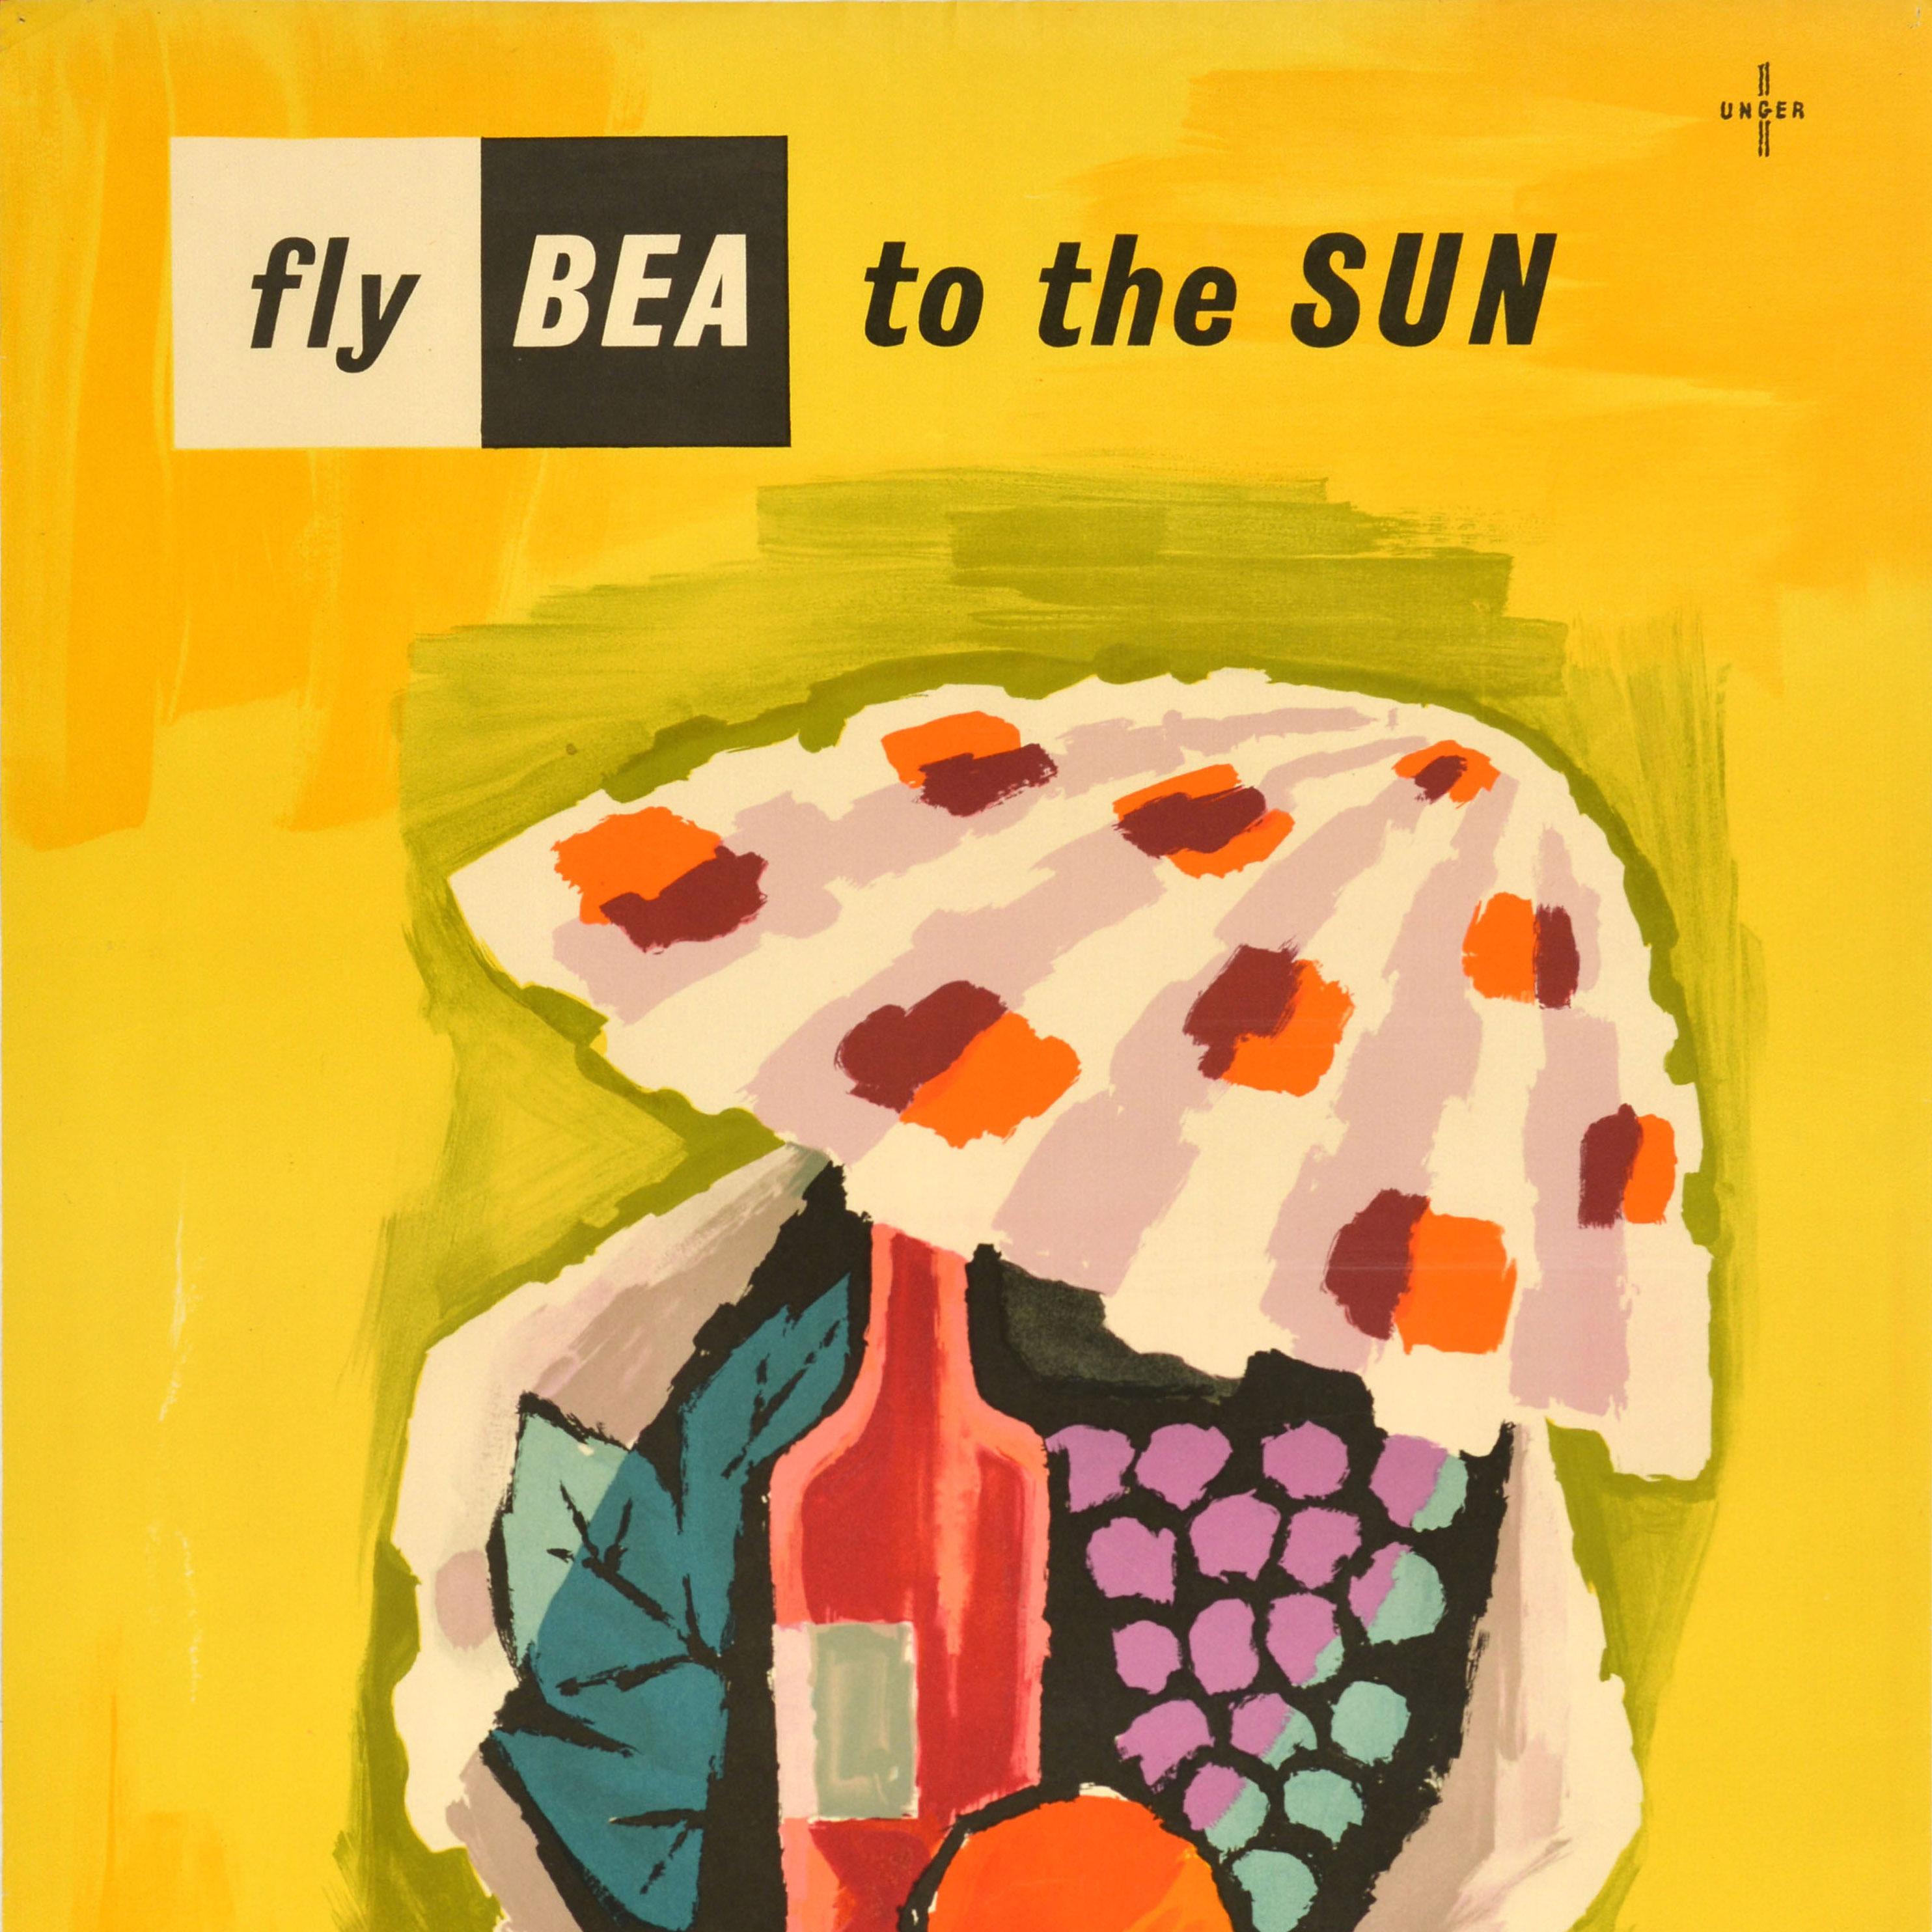 British Original Vintage Travel Poster Fly BEA To The Sun Sea Shell Wine Hans Unger Art For Sale